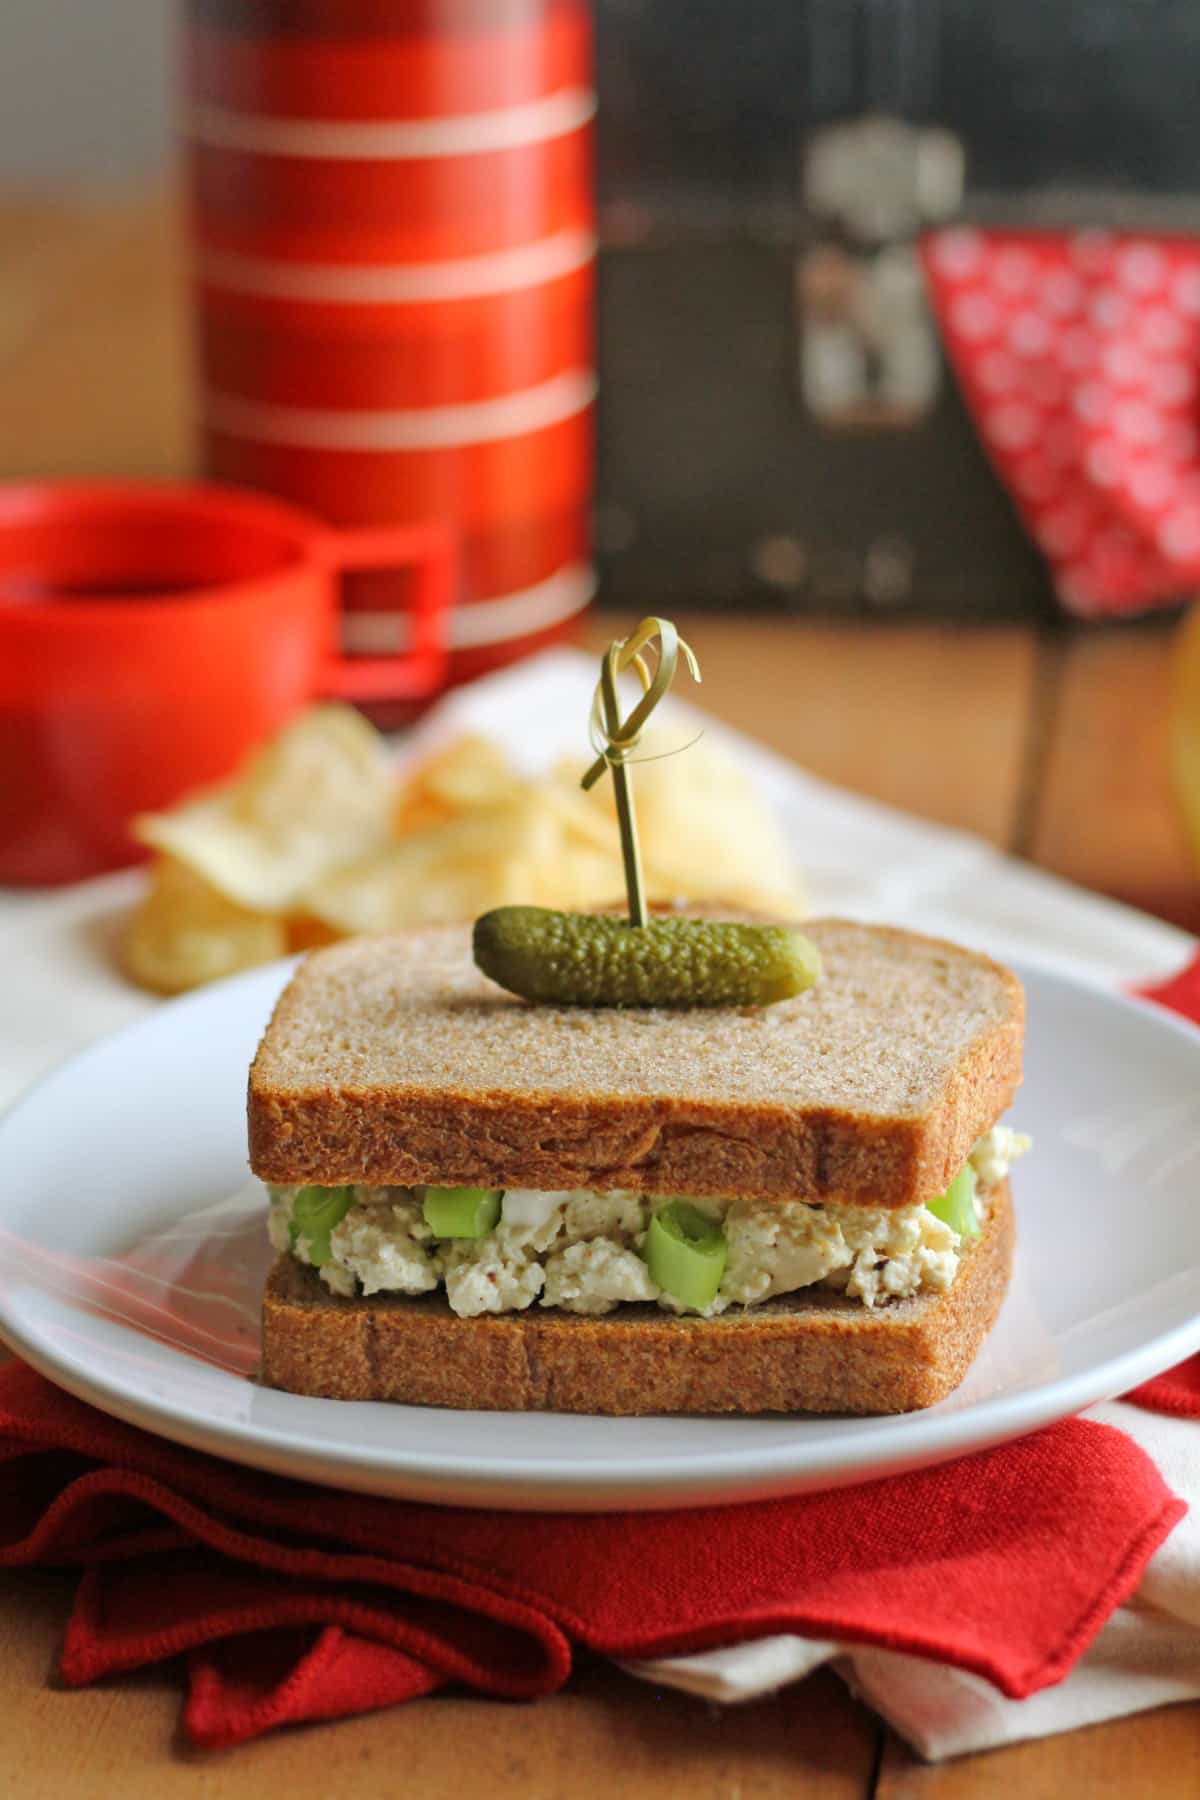 Vegan egg salad with potato chips in background.